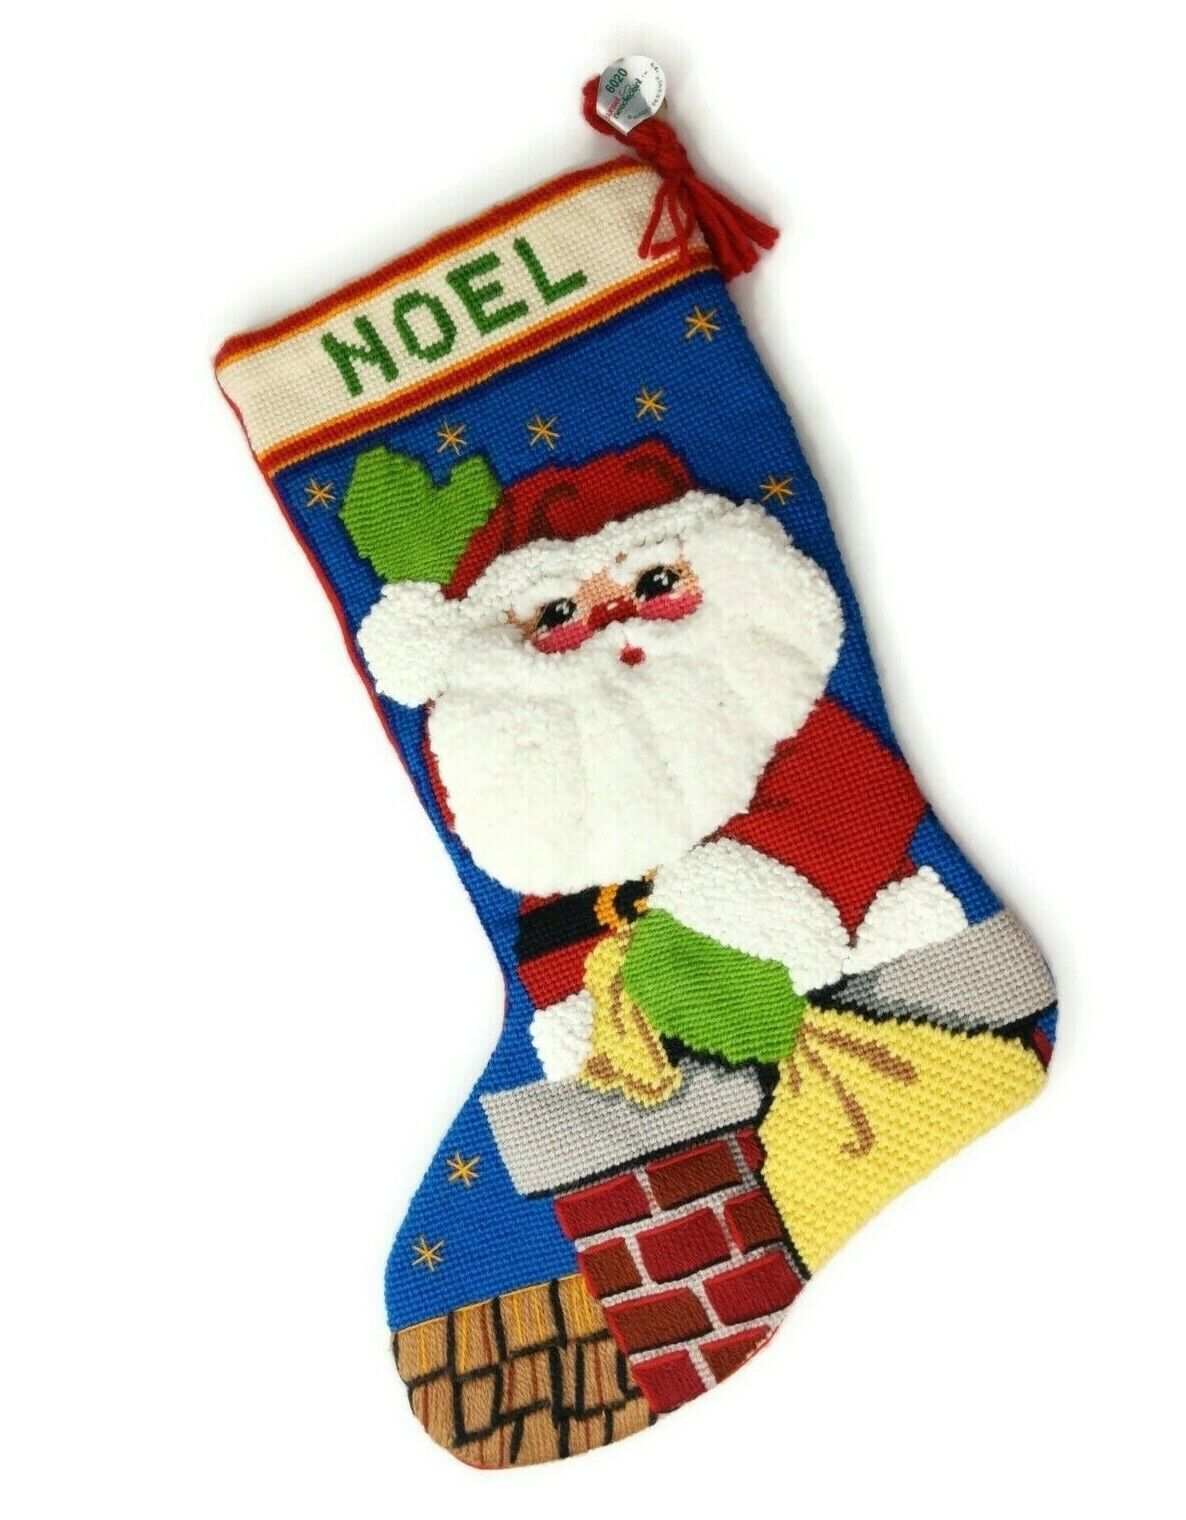 Vintage Christmas Stocking Completed 1978 Sunset #6020 Santa On a Rooftop 'Noel' - $97.99